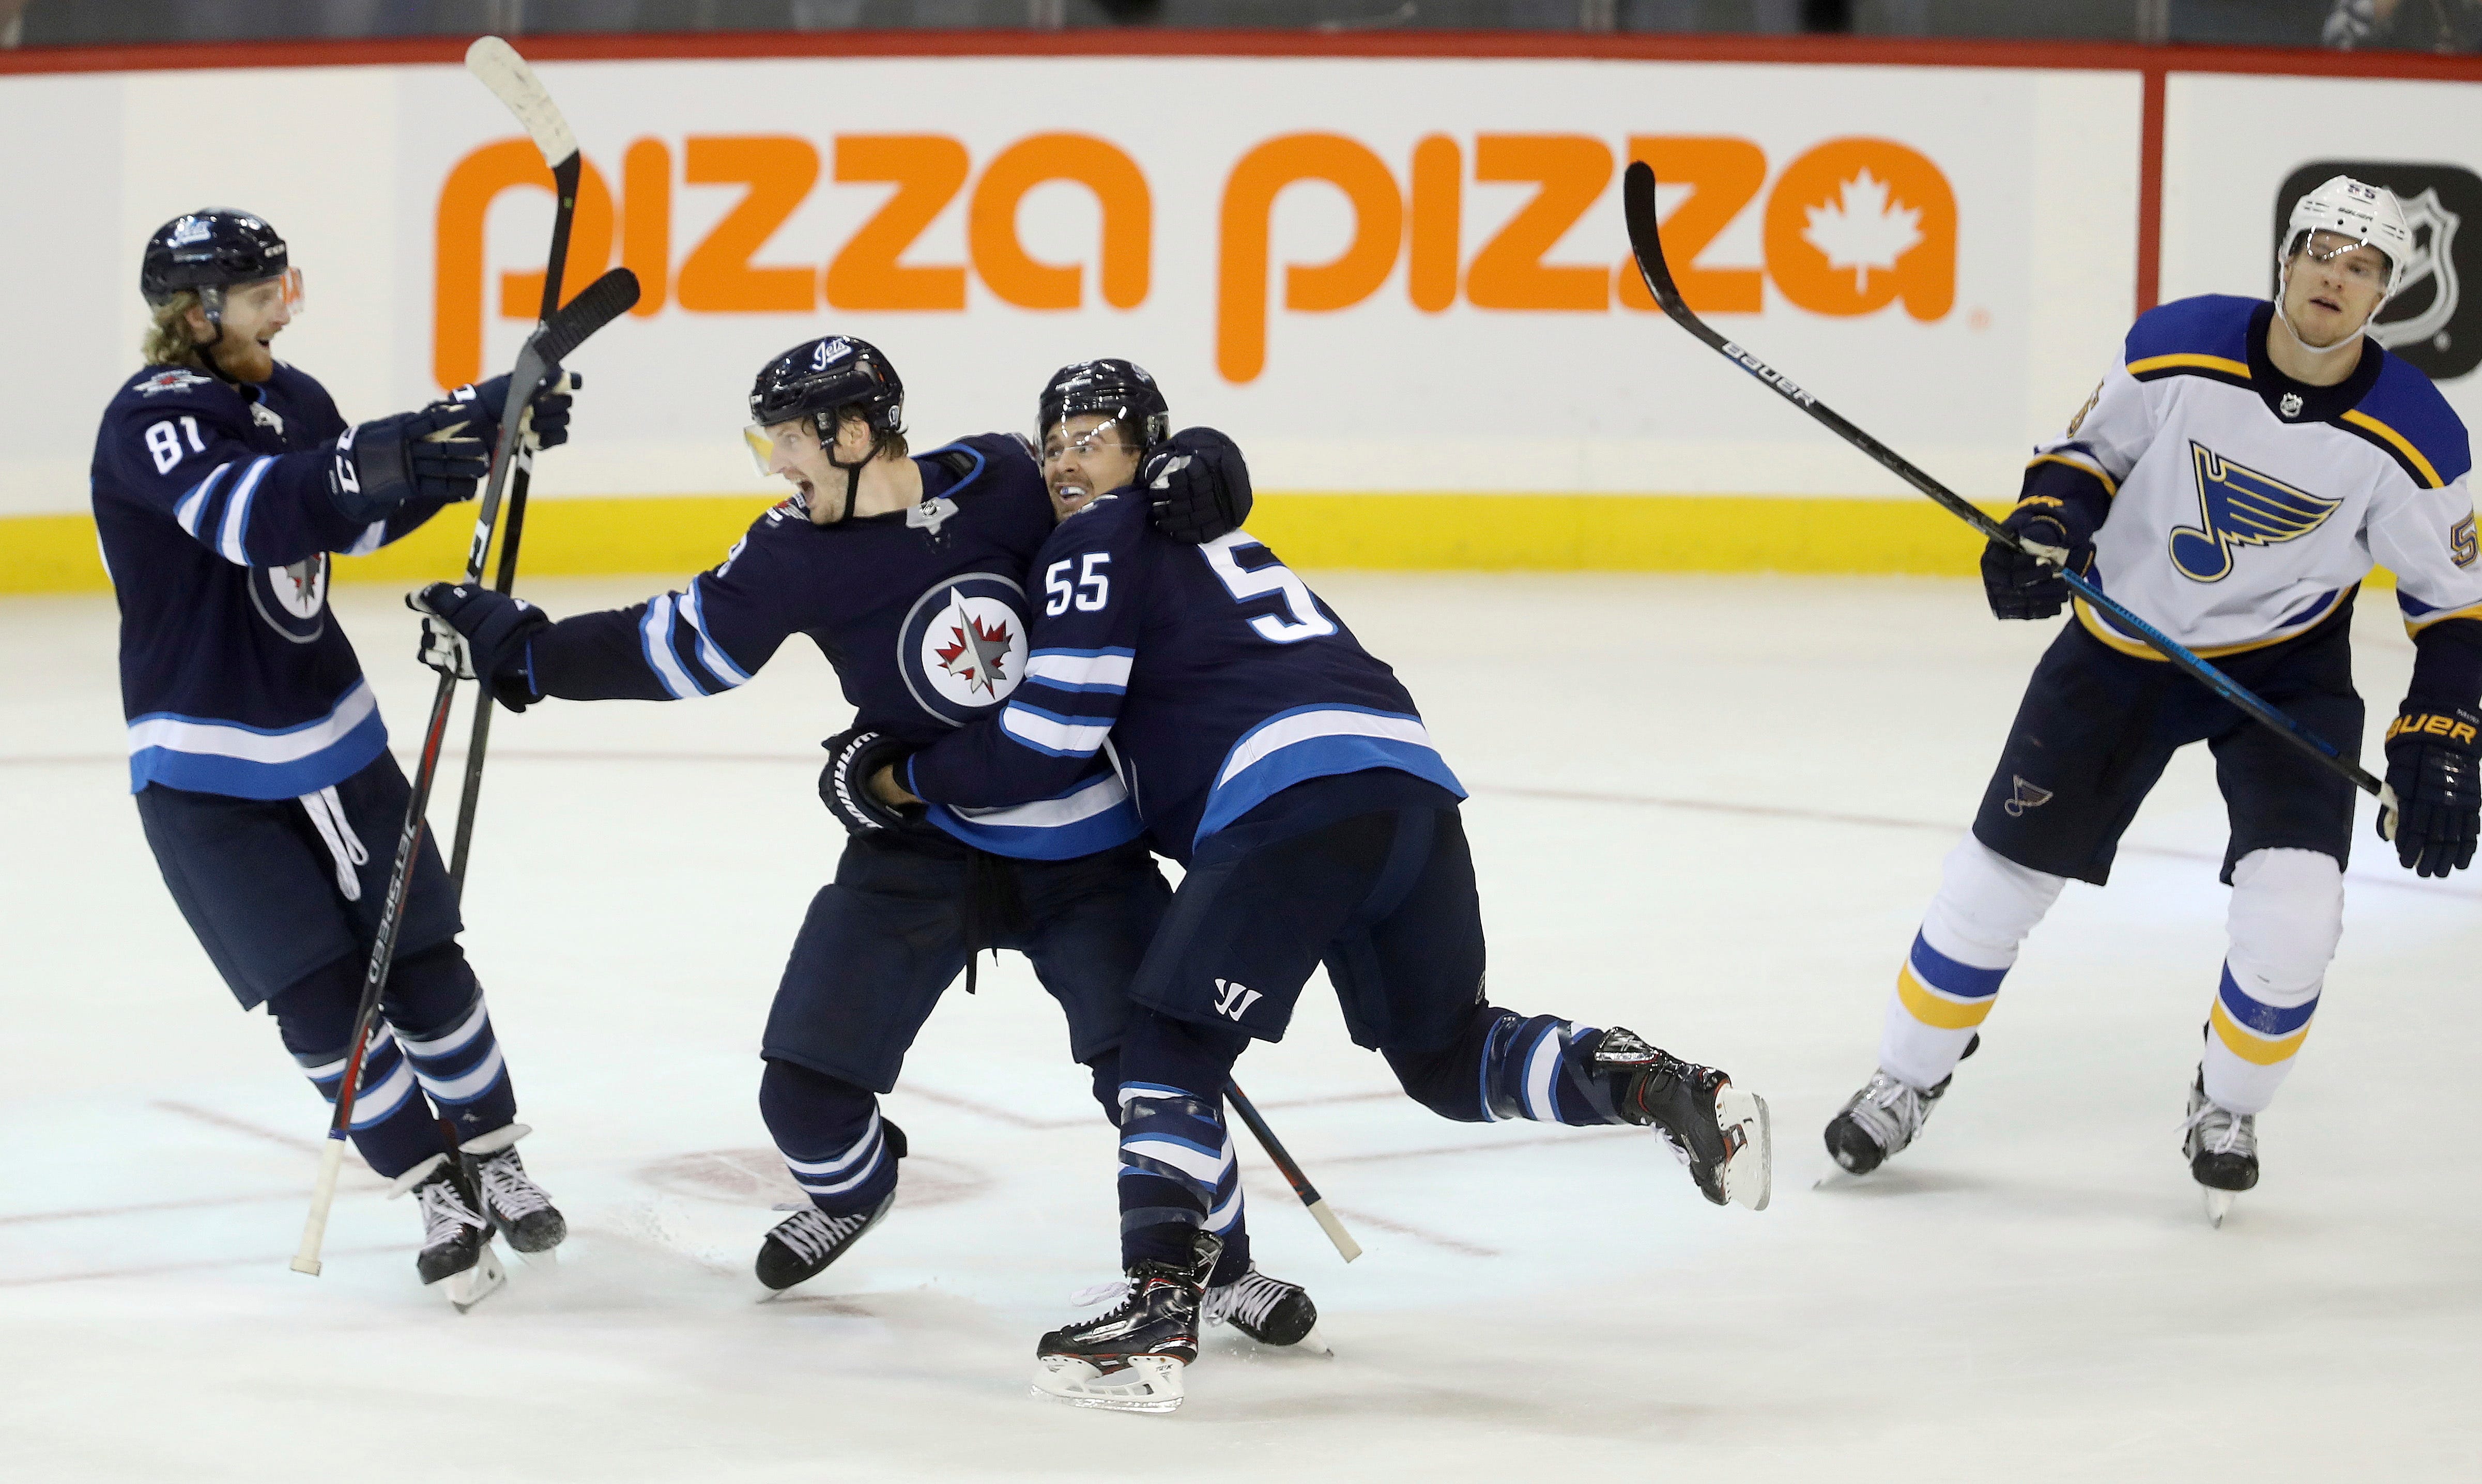 Trouba scores in OT to lift Jets over Blues 5-4